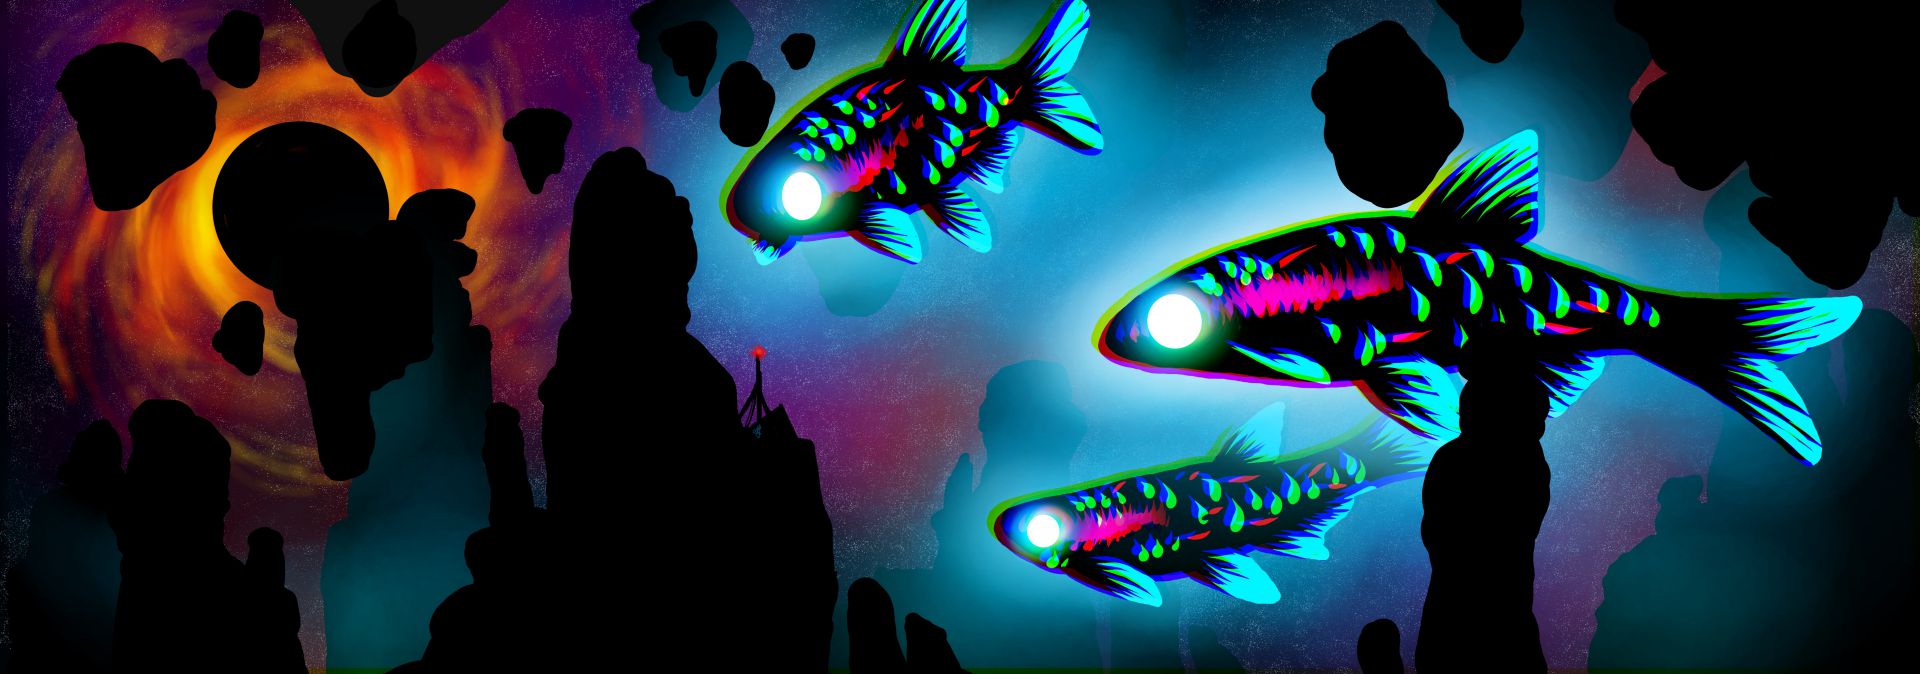 ID: A school of astral, vivid-colored fish swimming within a ruined landscape of a world orbiting a black hole.